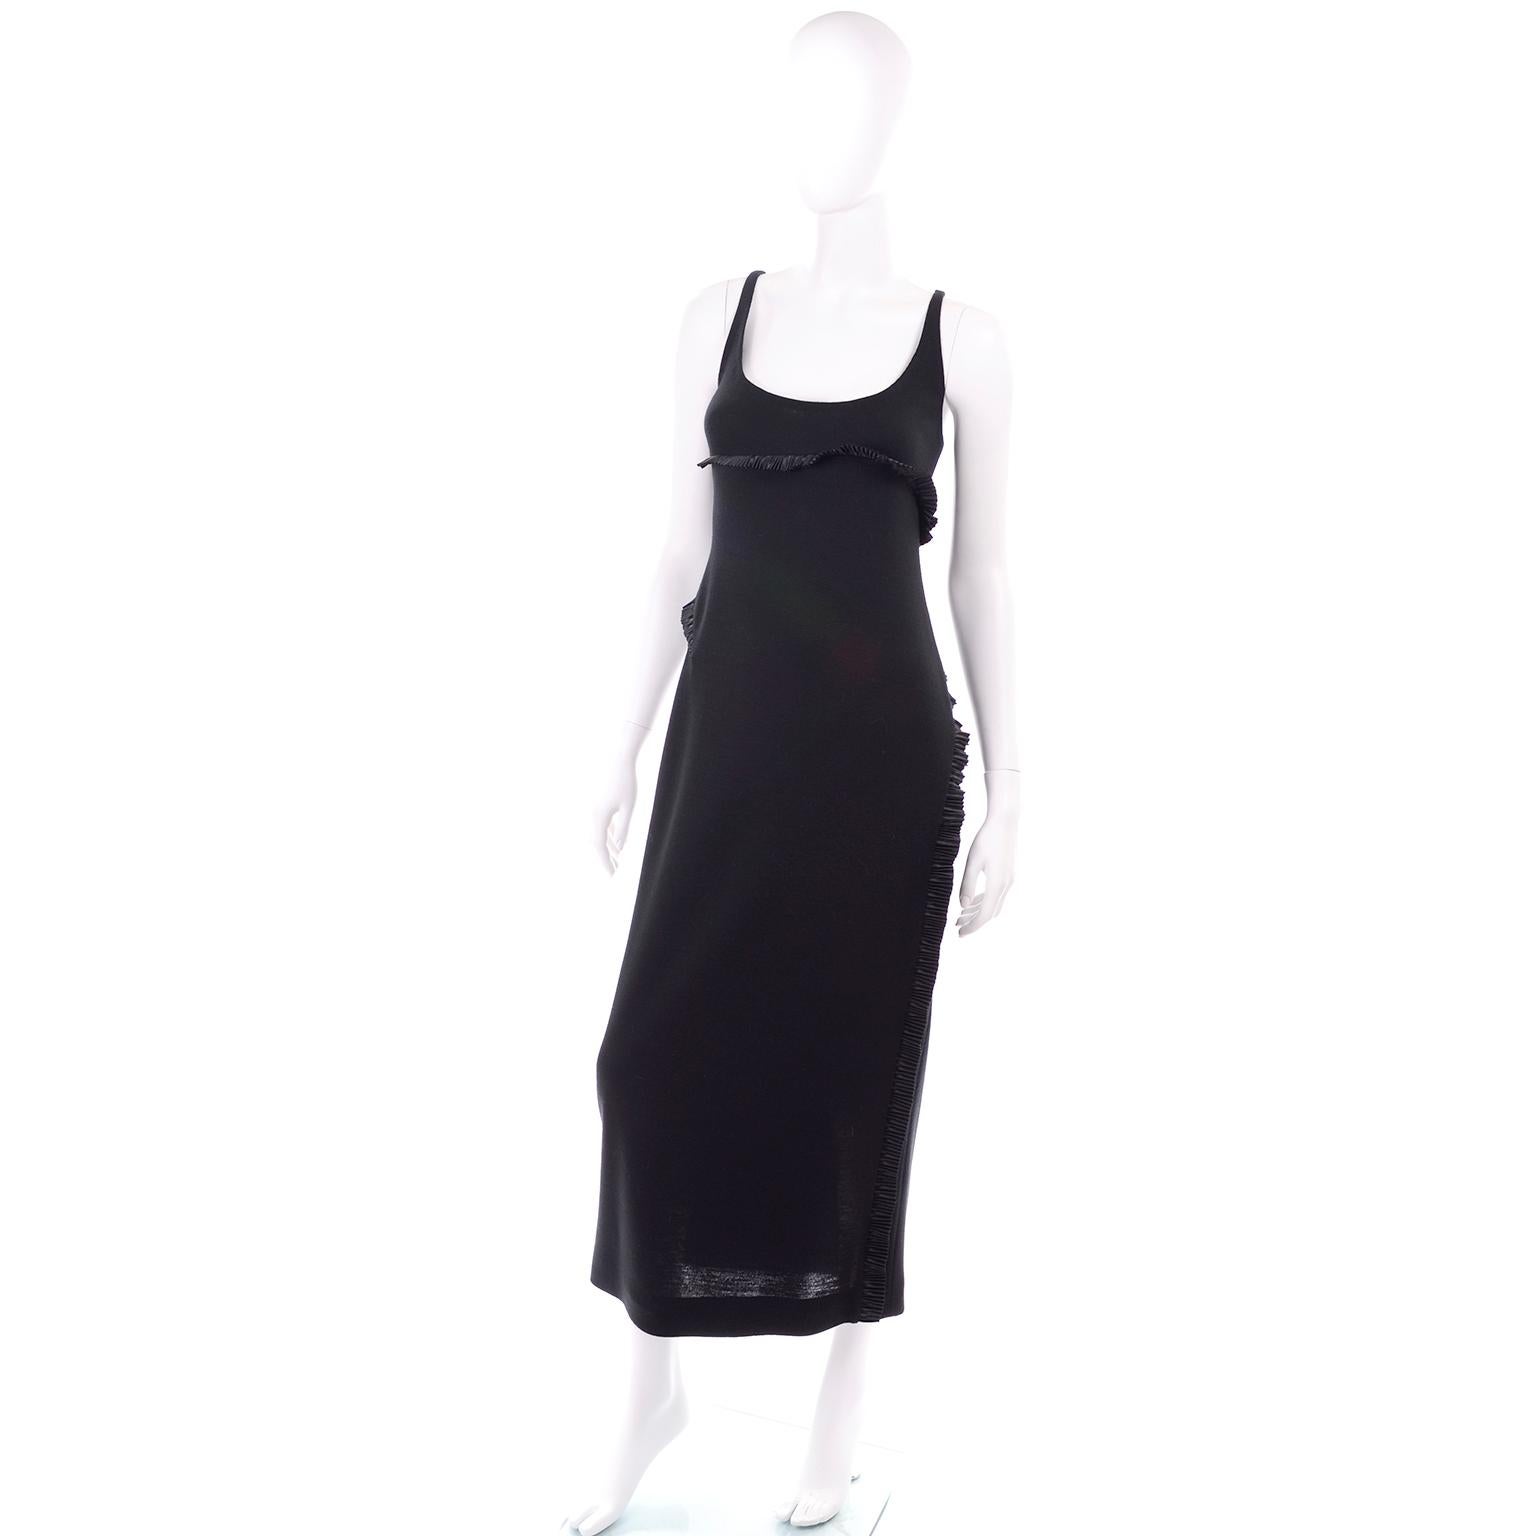 This is a two piece vintage black alpaca dress and coat ensemble from Geoffrey Beene from the Fall 1999 collection. This outfit includes a midi length black dress with a low scoop neck thin straps and diagonal pleated satin bands that are similar to